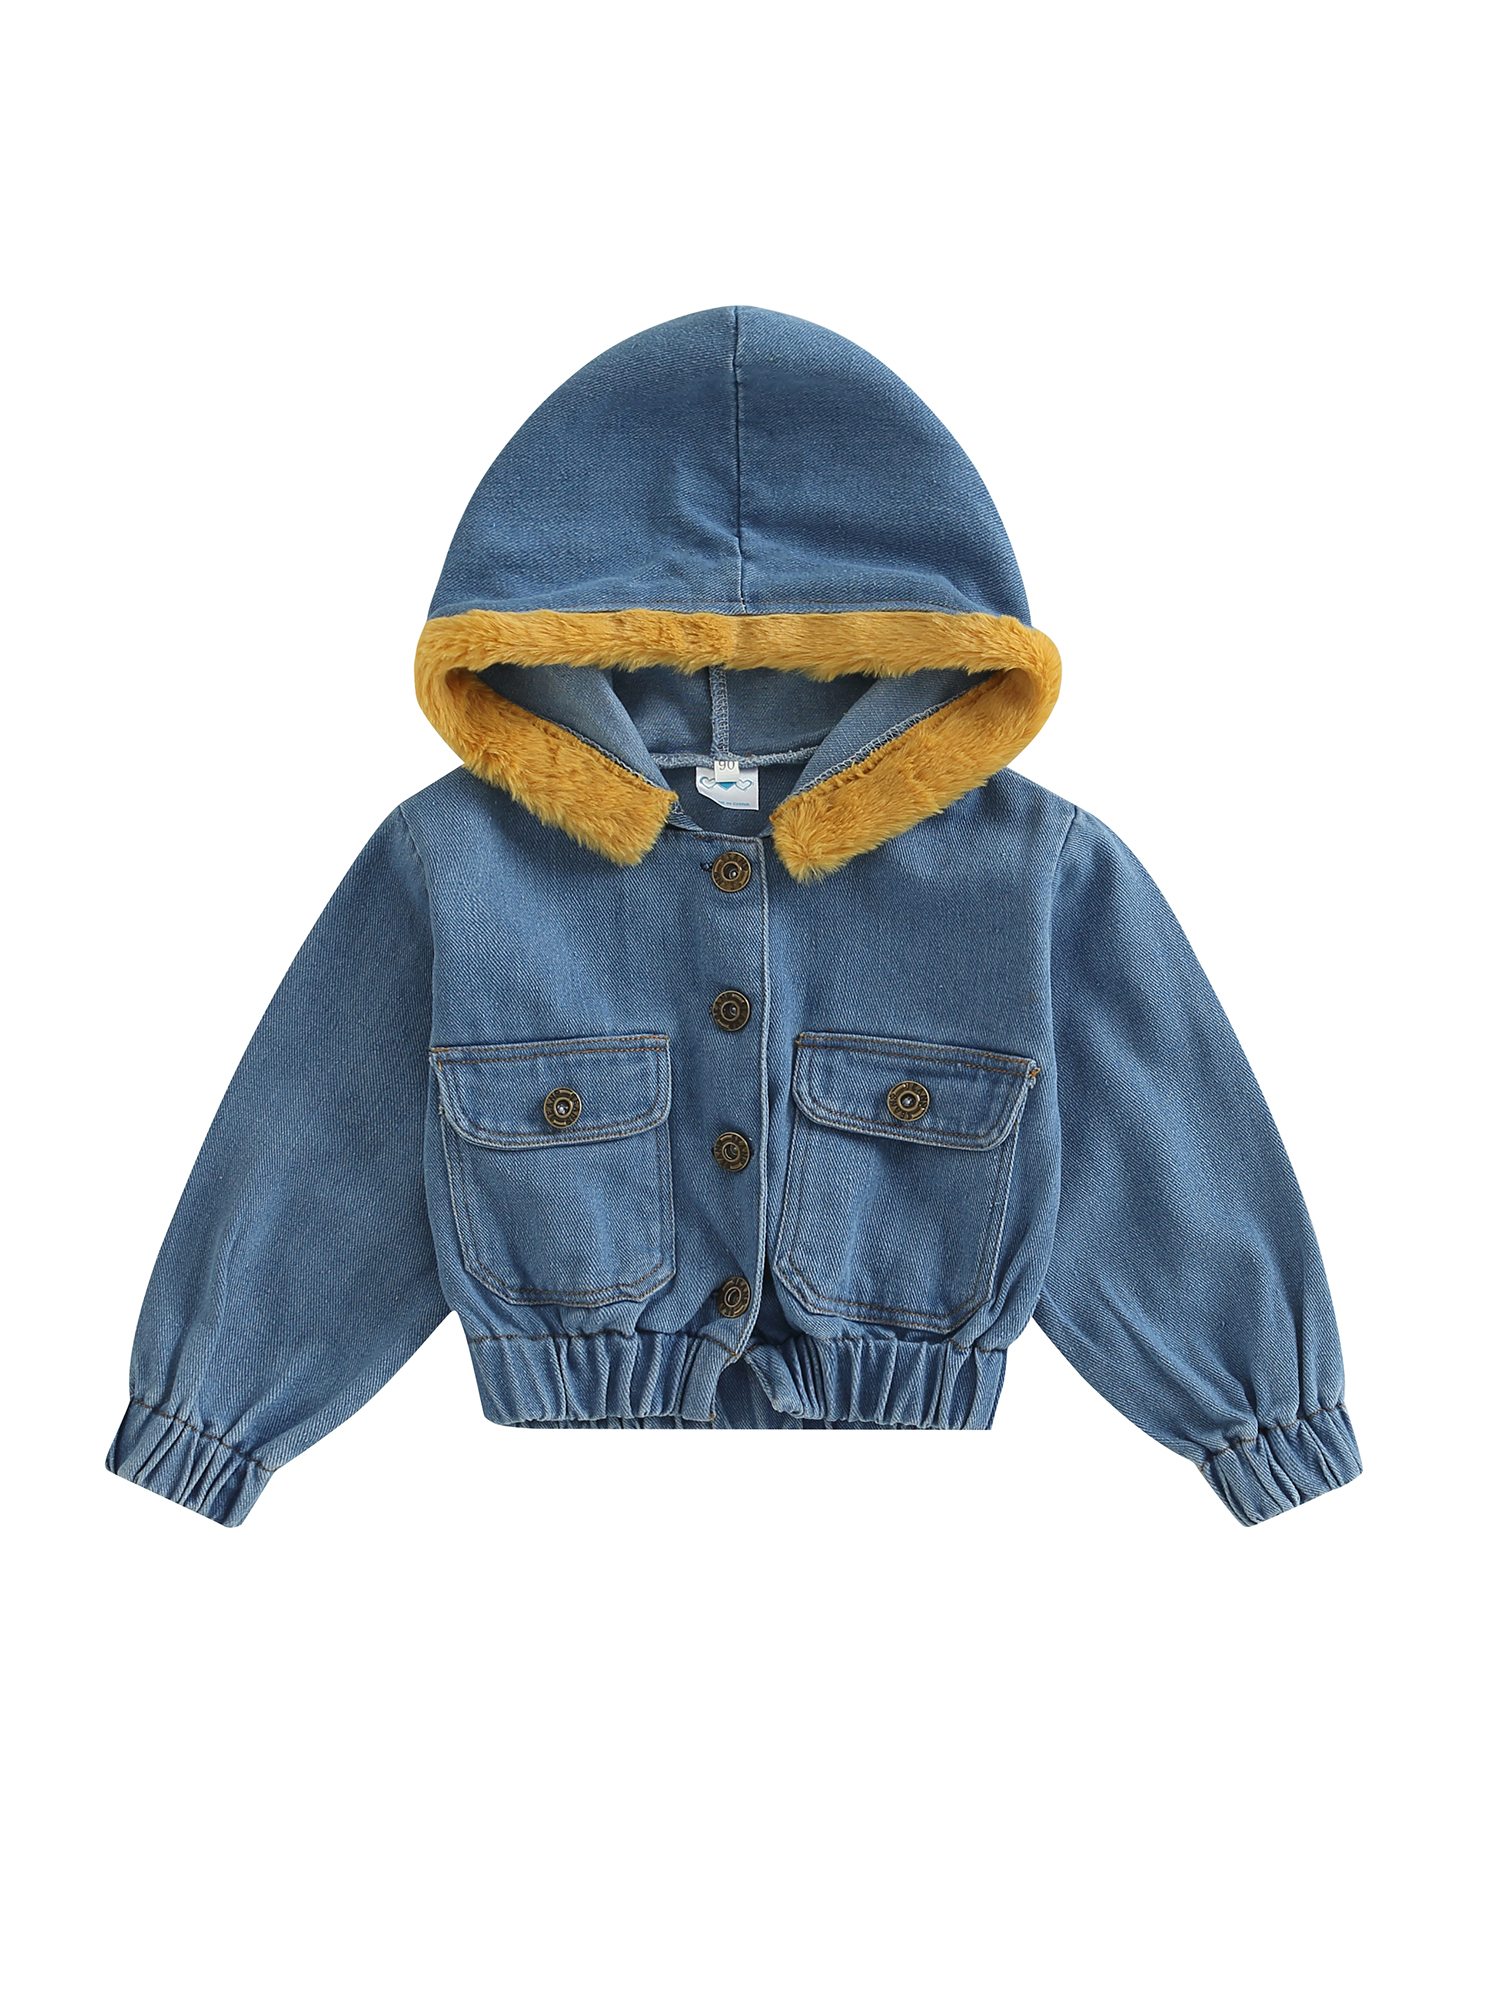 Toddler Baby Denim Jacket for Girls, Blue Long Sleeve Single Breasted Hooded Coat with Flap Pockets - image 1 of 6